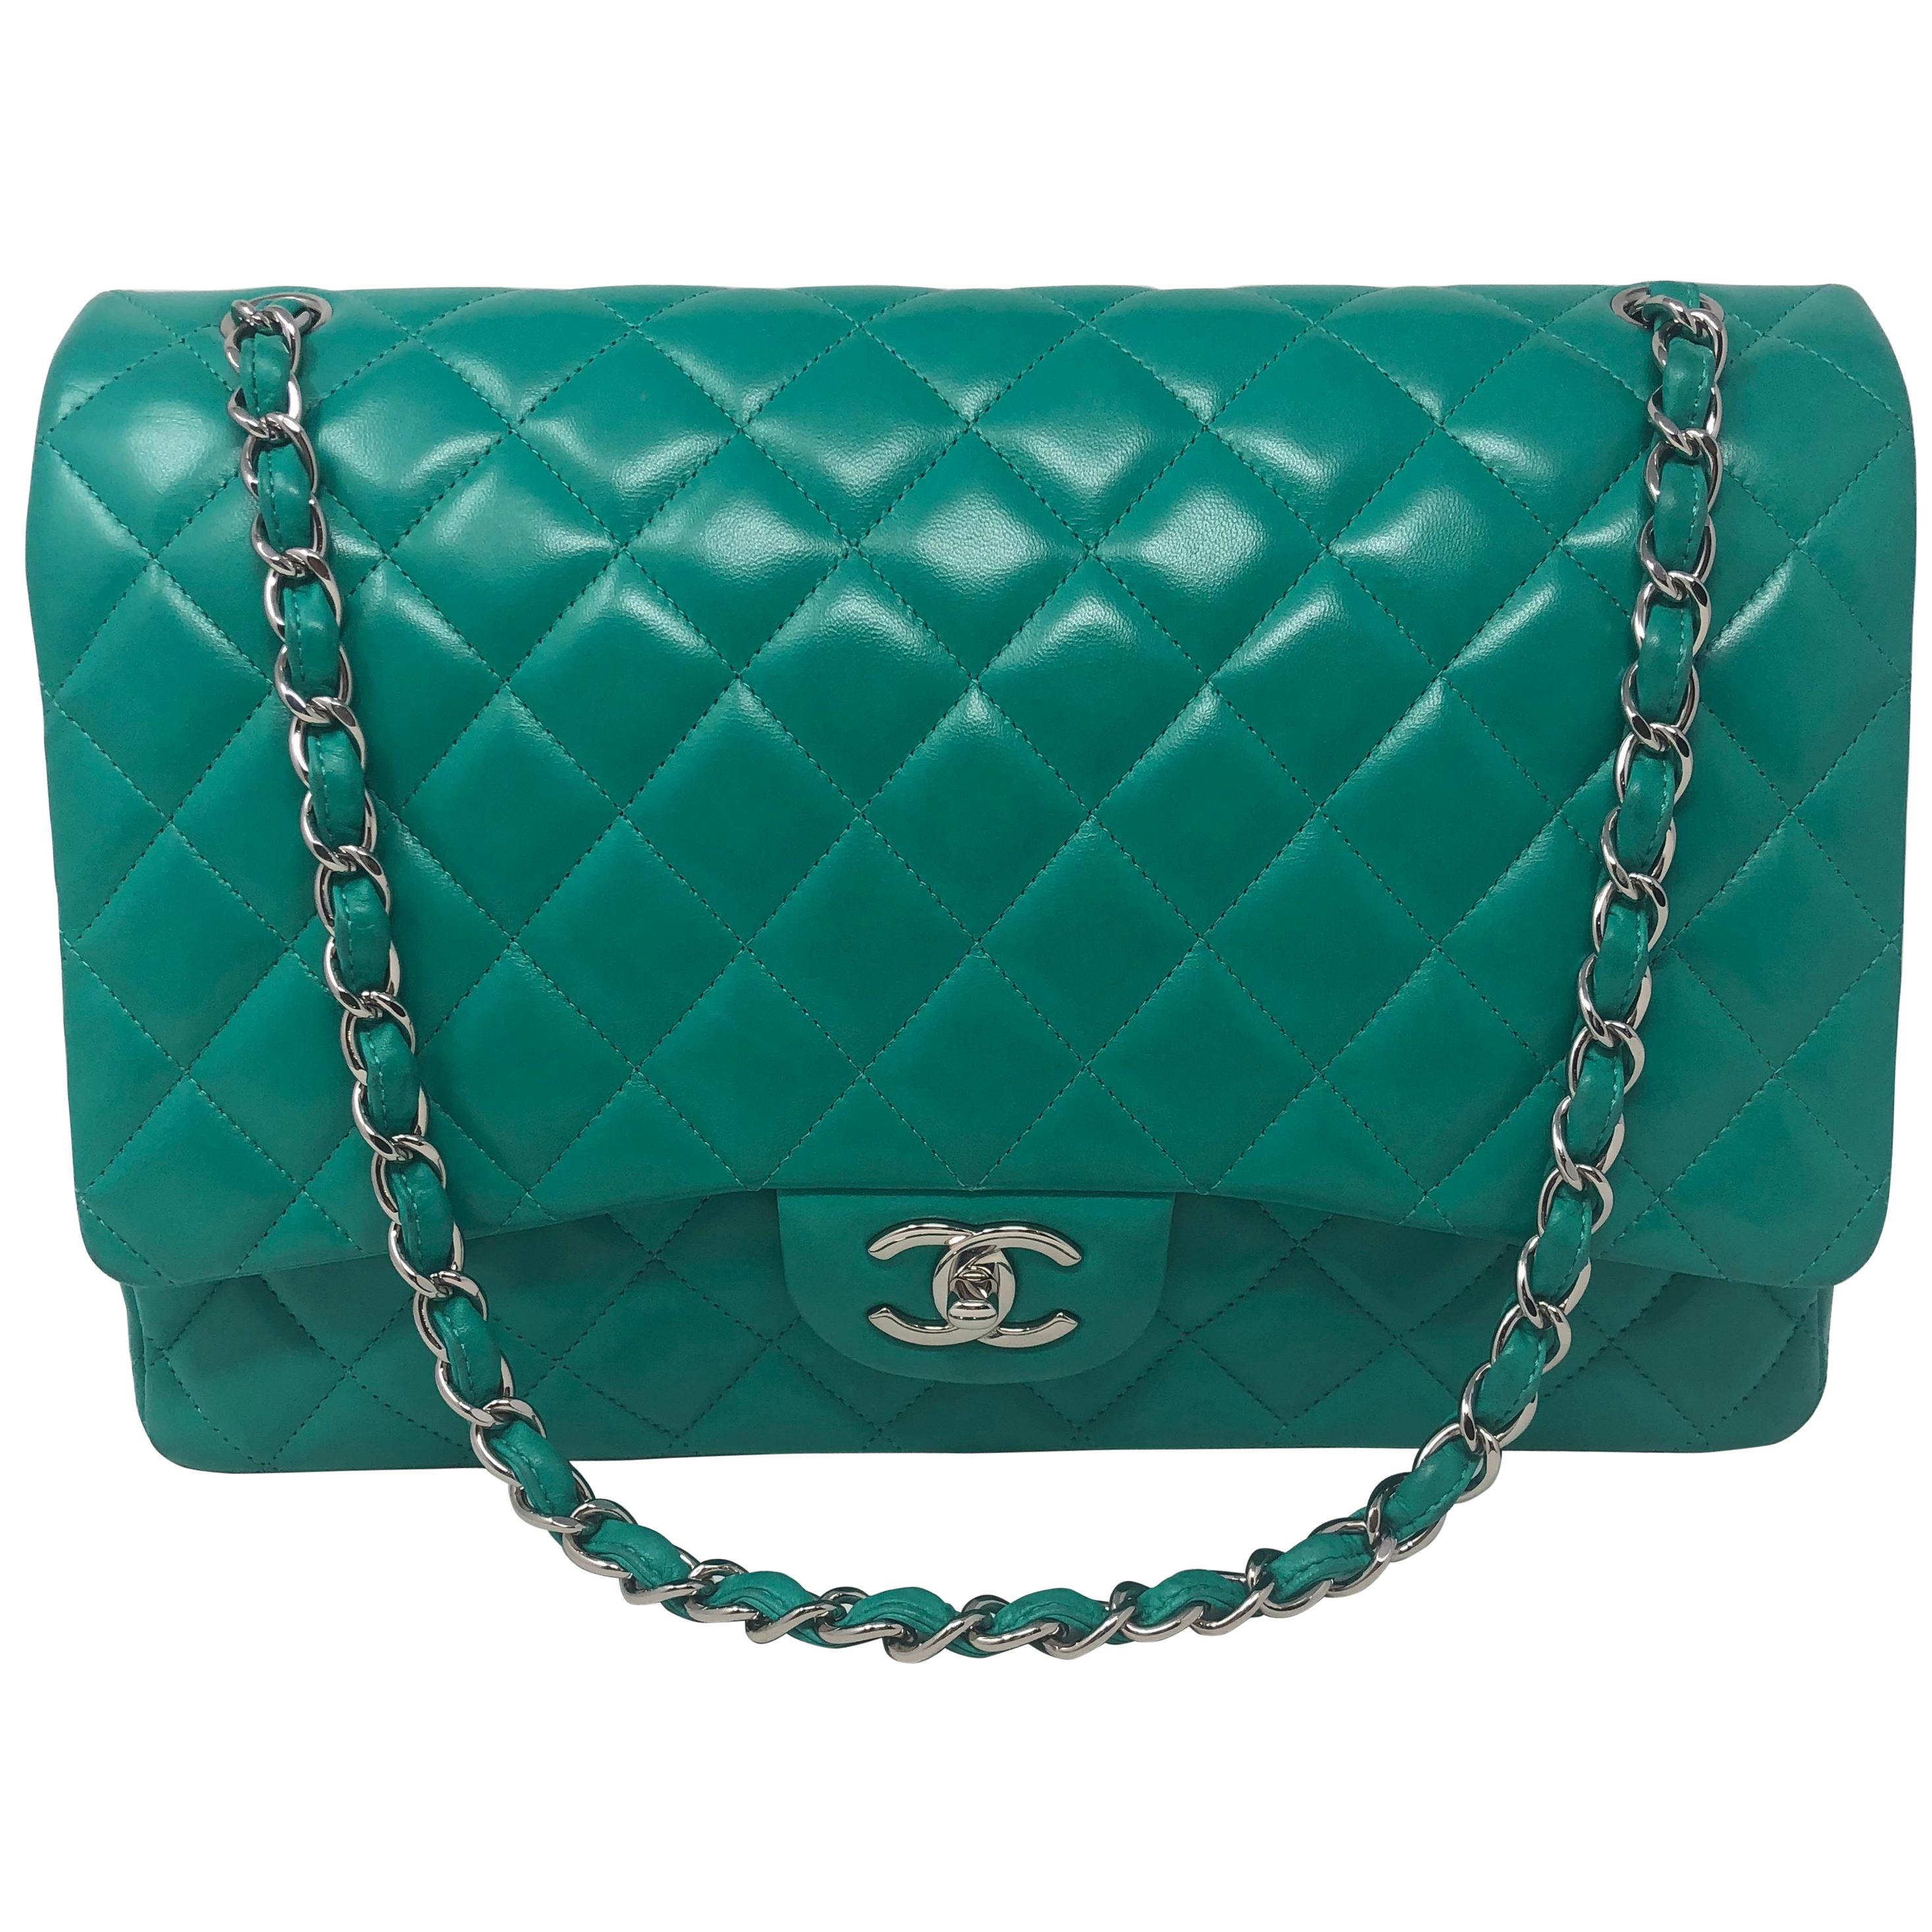 Chanel Menthe Green Leather Maxi Bag 